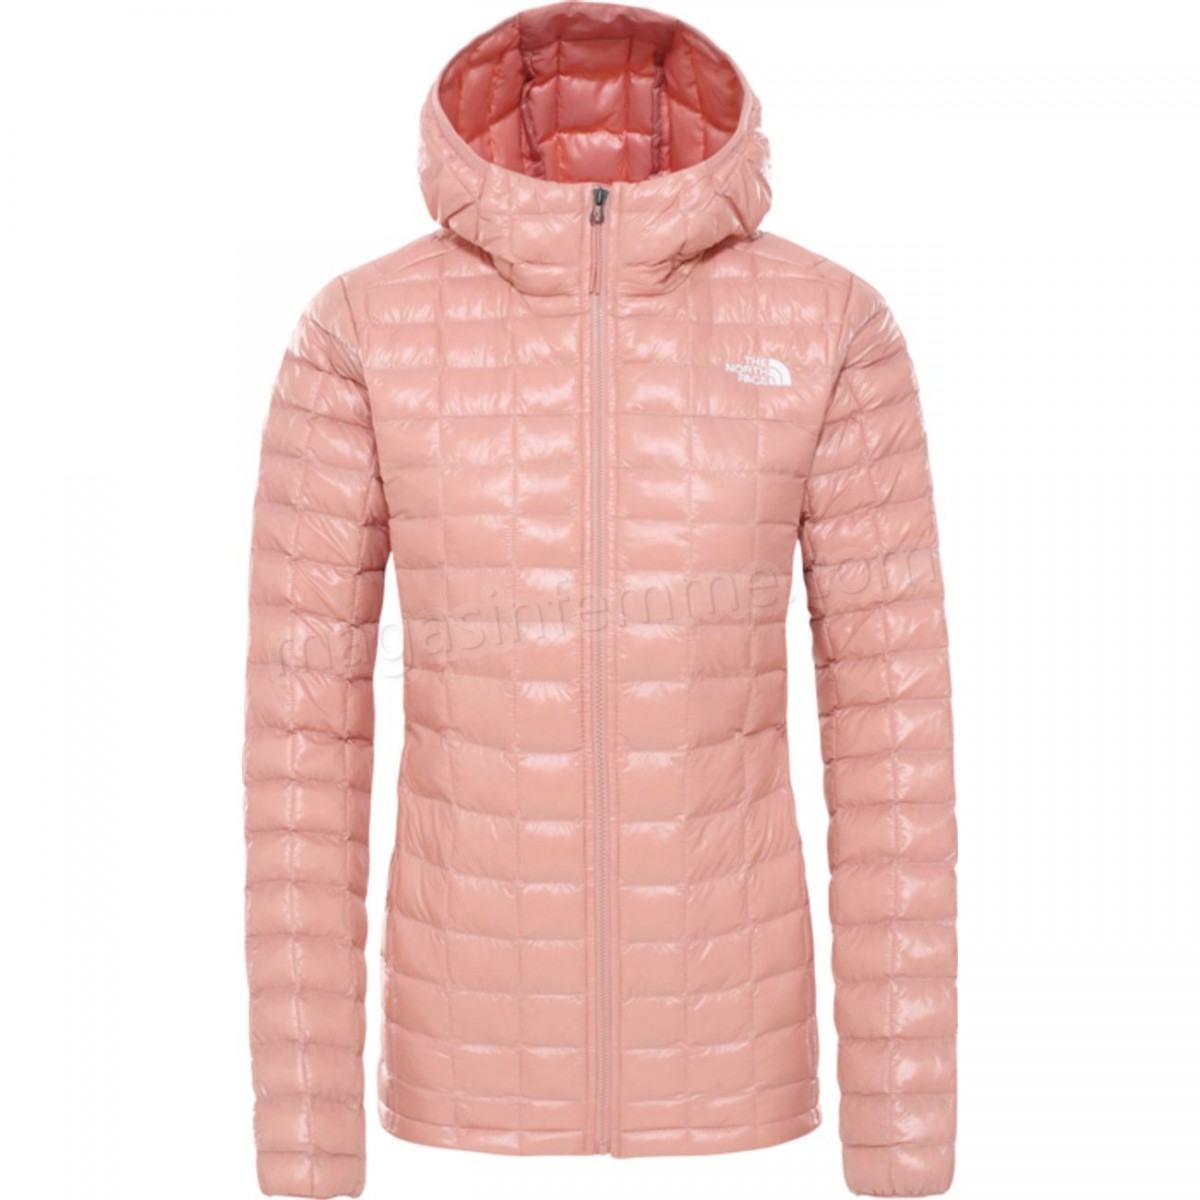 The North Face-VESTE Randonnée femme THE NORTH FACE THERMOBALL ECO en solde - -0